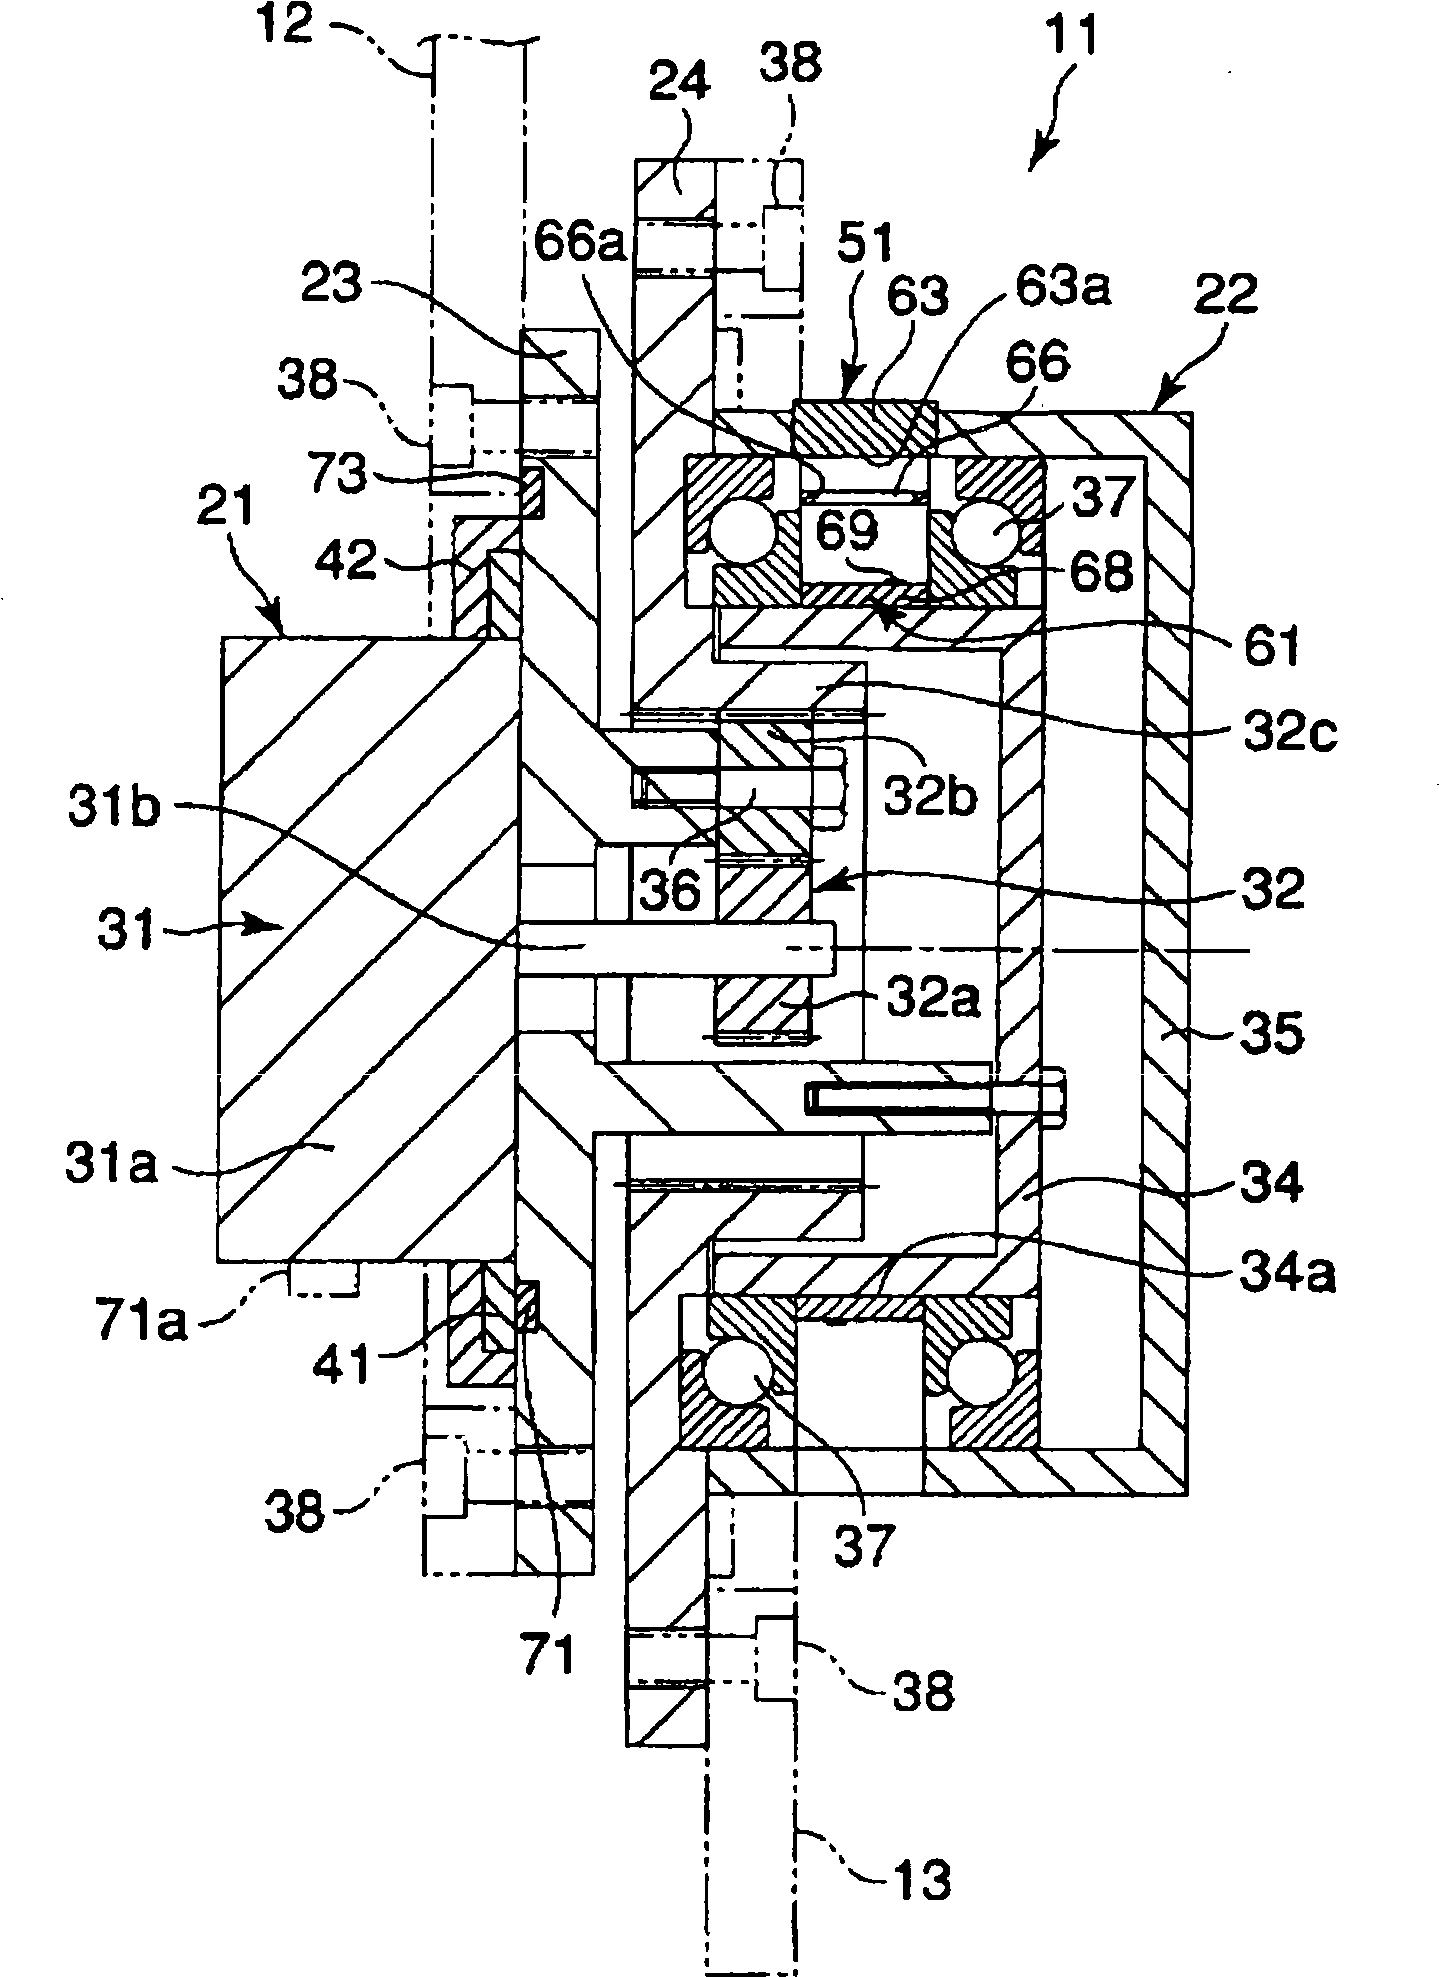 Motion assisting device and motion assisting device maintenance/management system